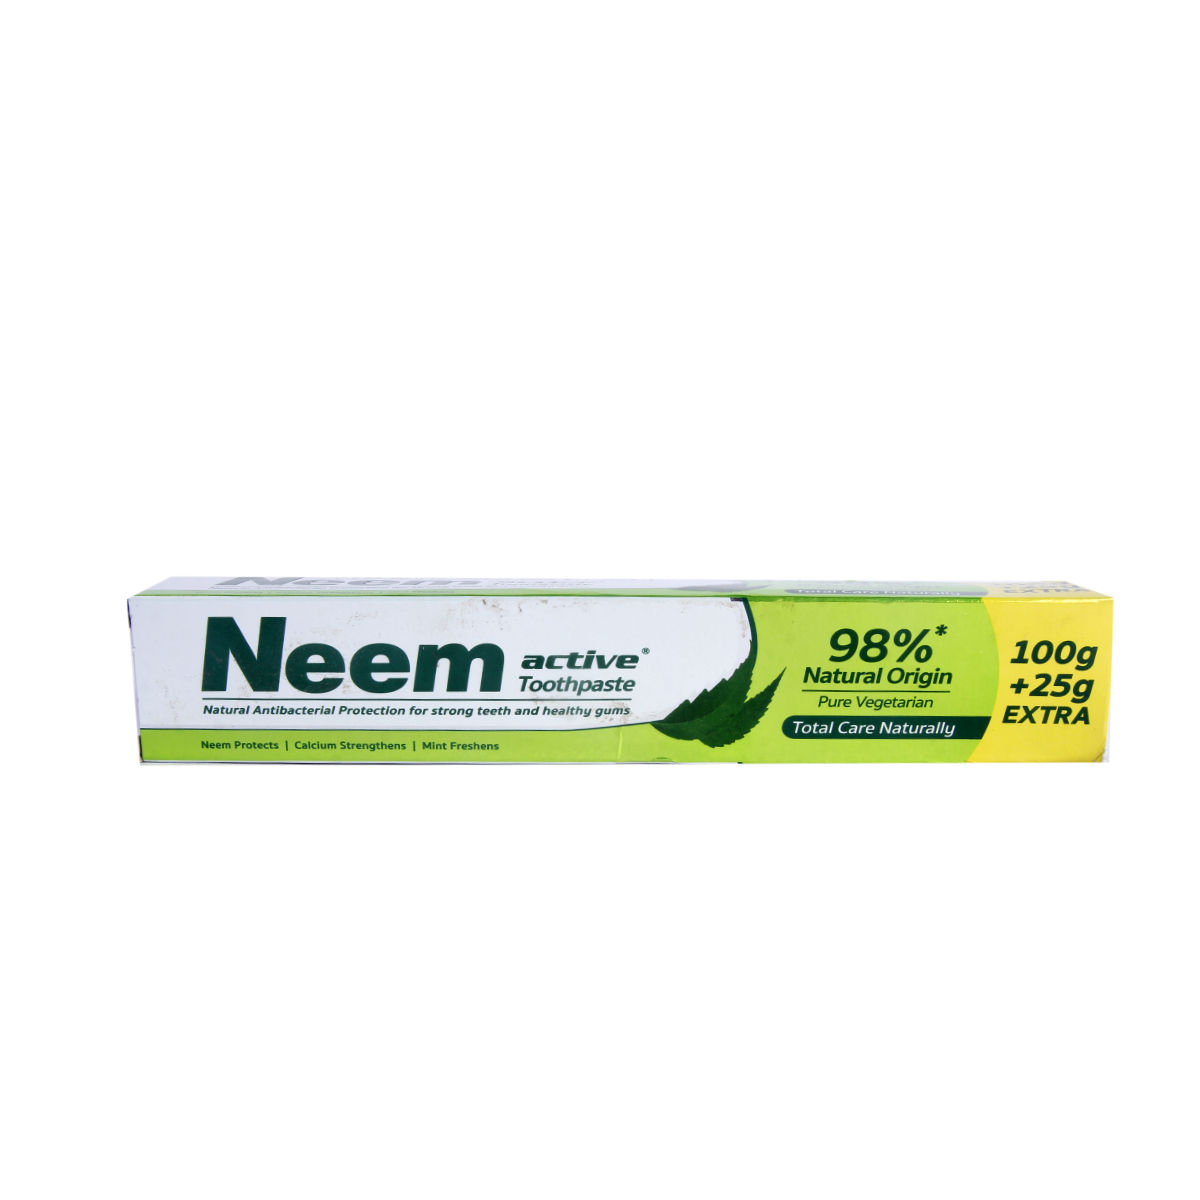 Neem Active Toothpaste, 100 gm, Pack of 1 